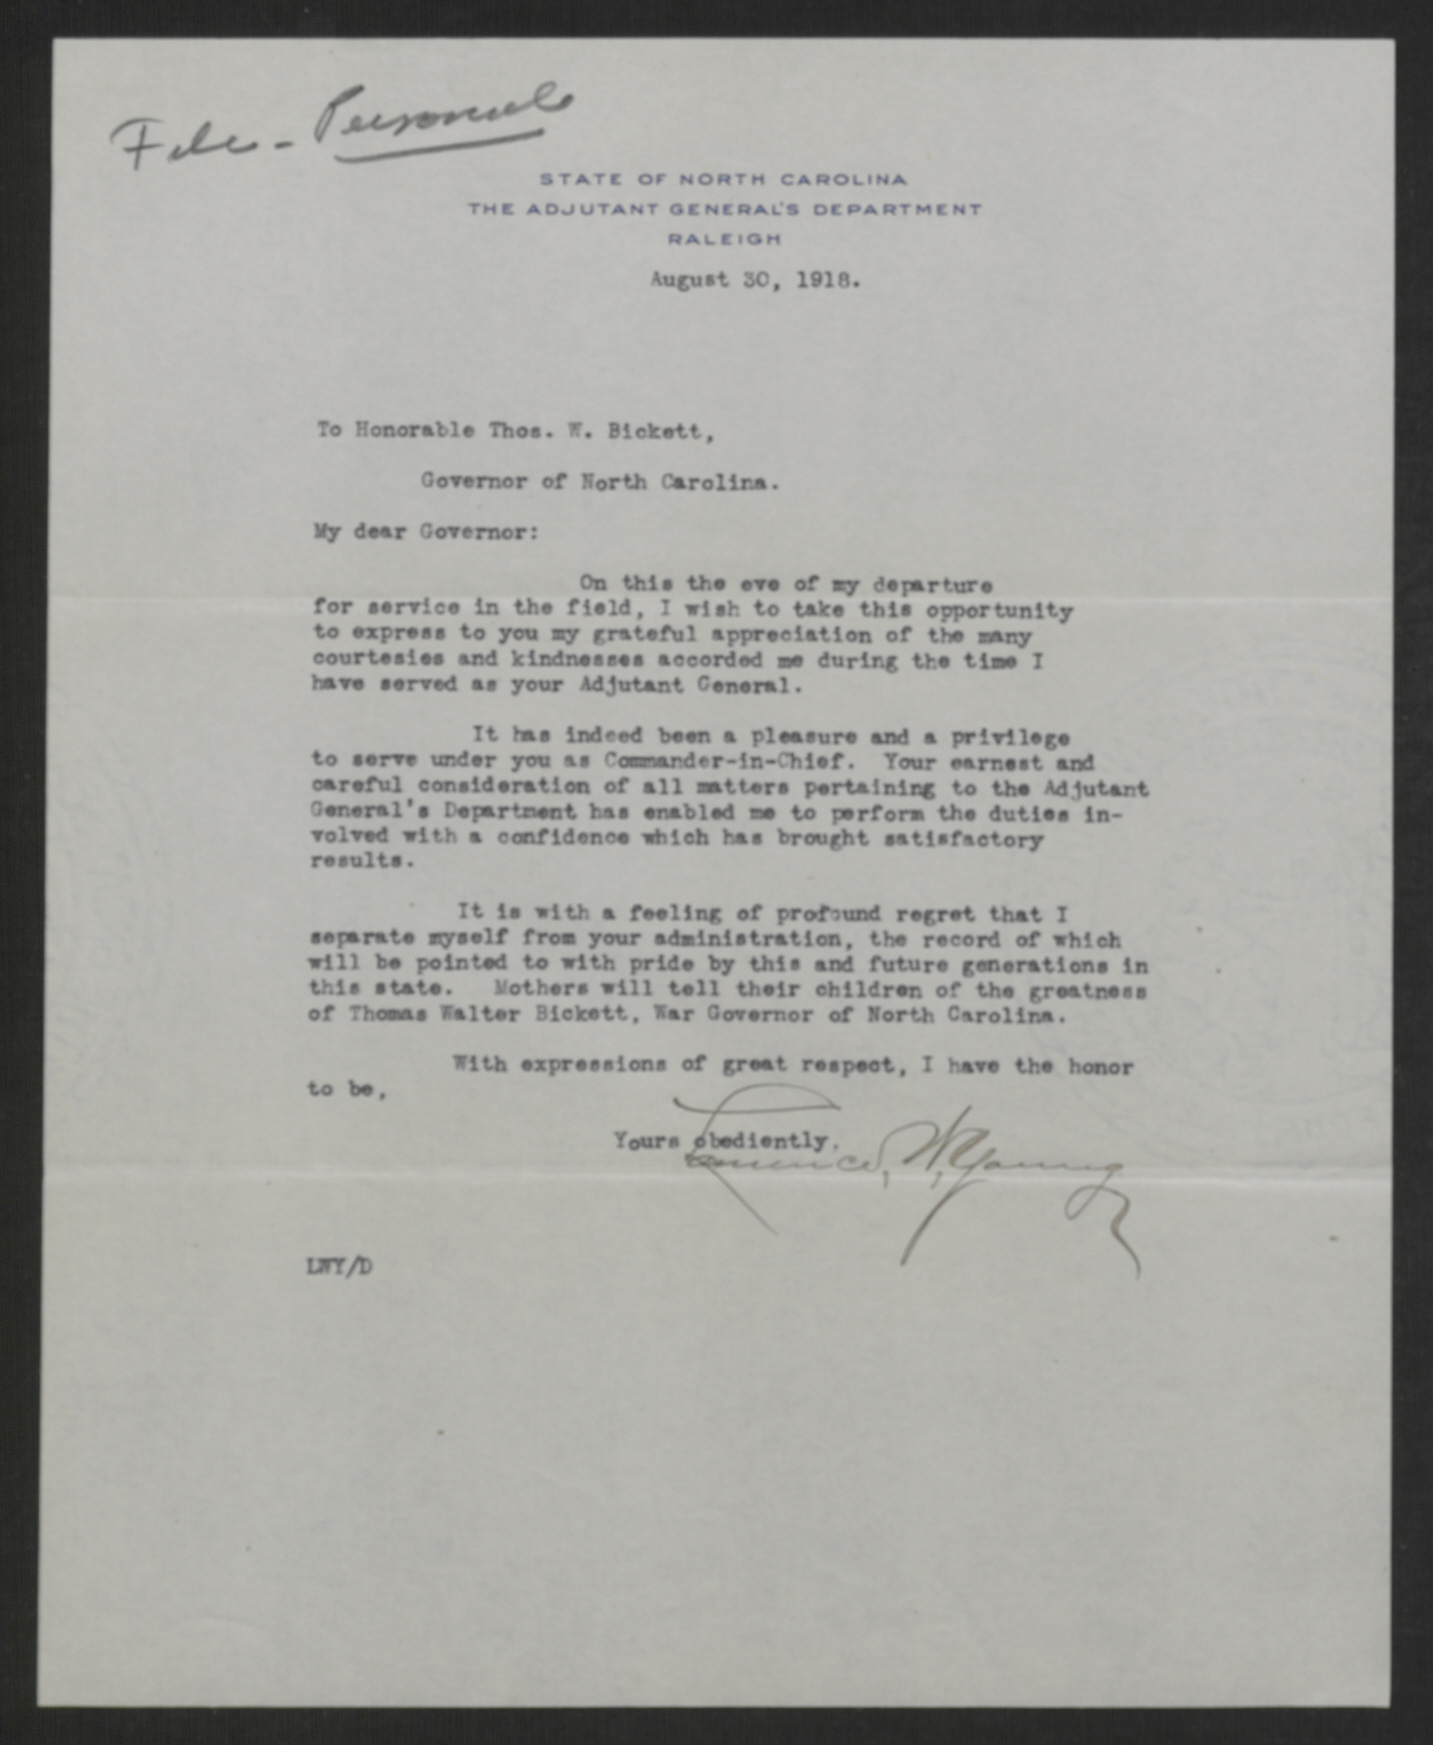 Letter from Laurence W. Young to Thomas W. Bickett, August 30, 1918